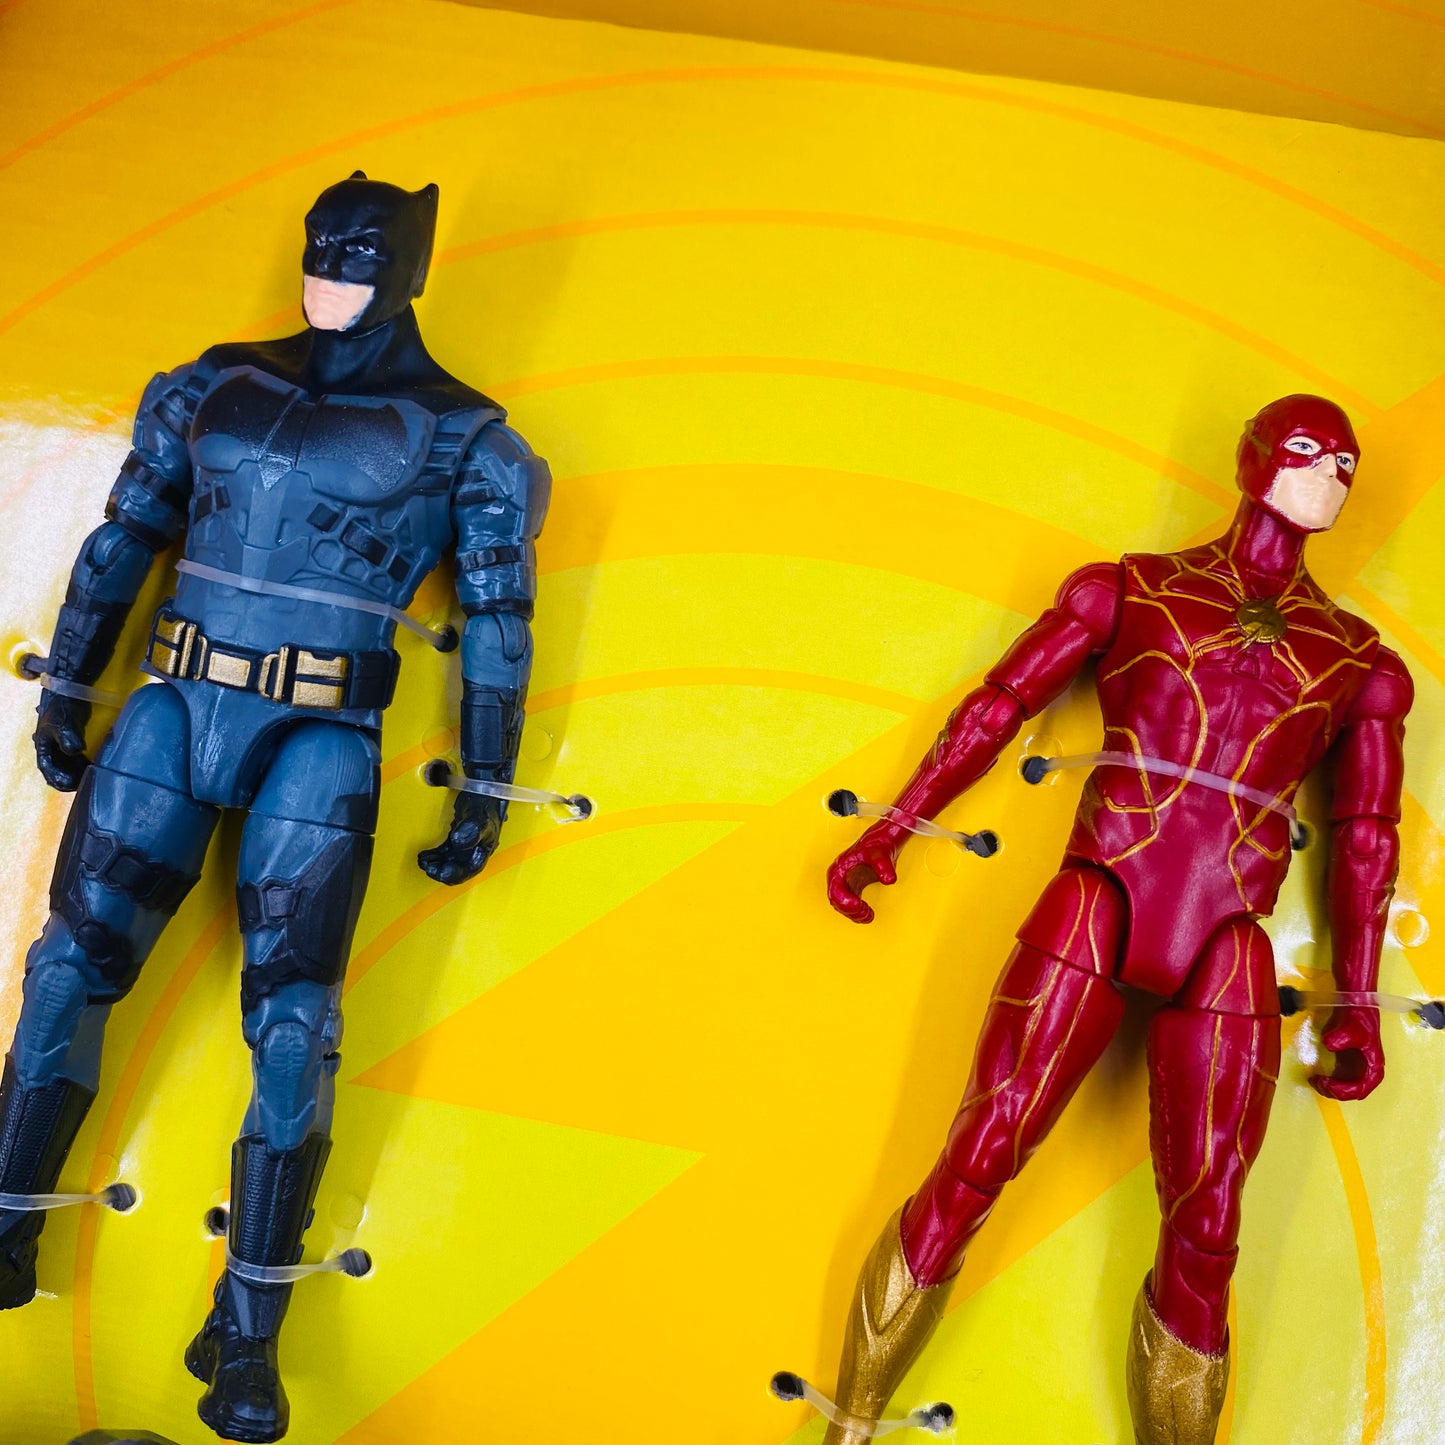 The Flash The Flash & Batman & Batcycle boxed 4” action figures & vehicle (2023) Spin Master